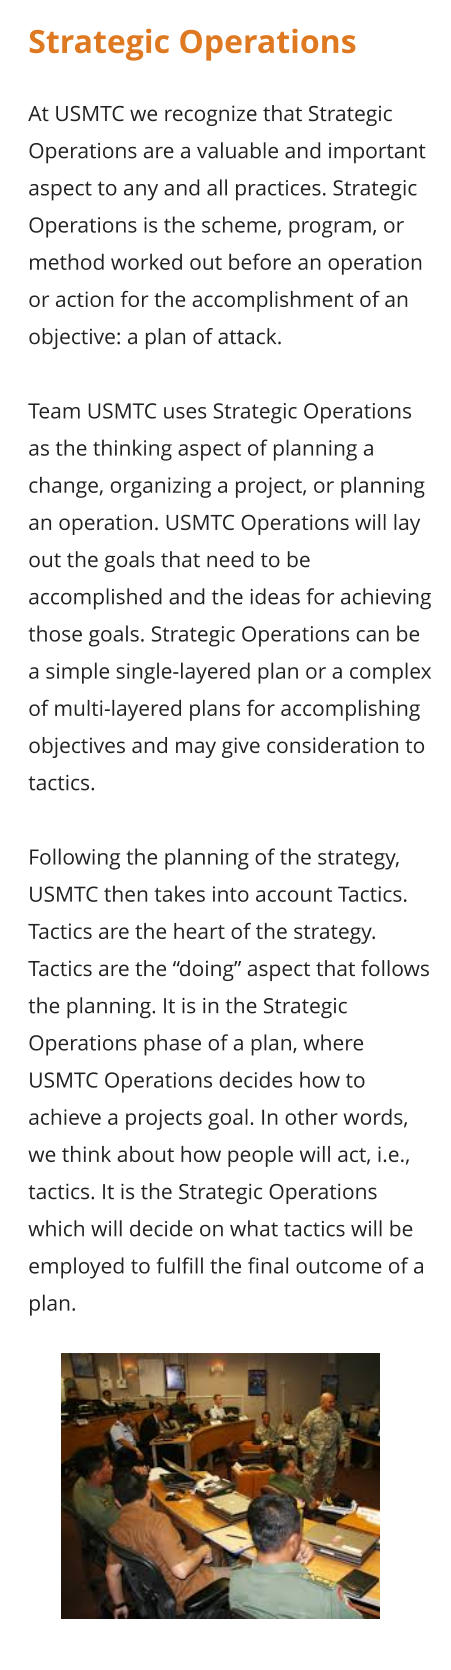 Strategic Operations  At USMTC we recognize that Strategic Operations are a valuable and important aspect to any and all practices. Strategic Operations is the scheme, program, or method worked out before an operation or action for the accomplishment of an objective: a plan of attack.  Team USMTC uses Strategic Operations as the thinking aspect of planning a change, organizing a project, or planning an operation. USMTC Operations will lay out the goals that need to be accomplished and the ideas for achieving those goals. Strategic Operations can be a simple single-layered plan or a complex of multi-layered plans for accomplishing objectives and may give consideration to tactics.  Following the planning of the strategy, USMTC then takes into account Tactics. Tactics are the heart of the strategy. Tactics are the “doing” aspect that follows the planning. It is in the Strategic Operations phase of a plan, where USMTC Operations decides how to achieve a projects goal. In other words, we think about how people will act, i.e., tactics. It is the Strategic Operations which will decide on what tactics will be employed to fulfill the final outcome of a plan.